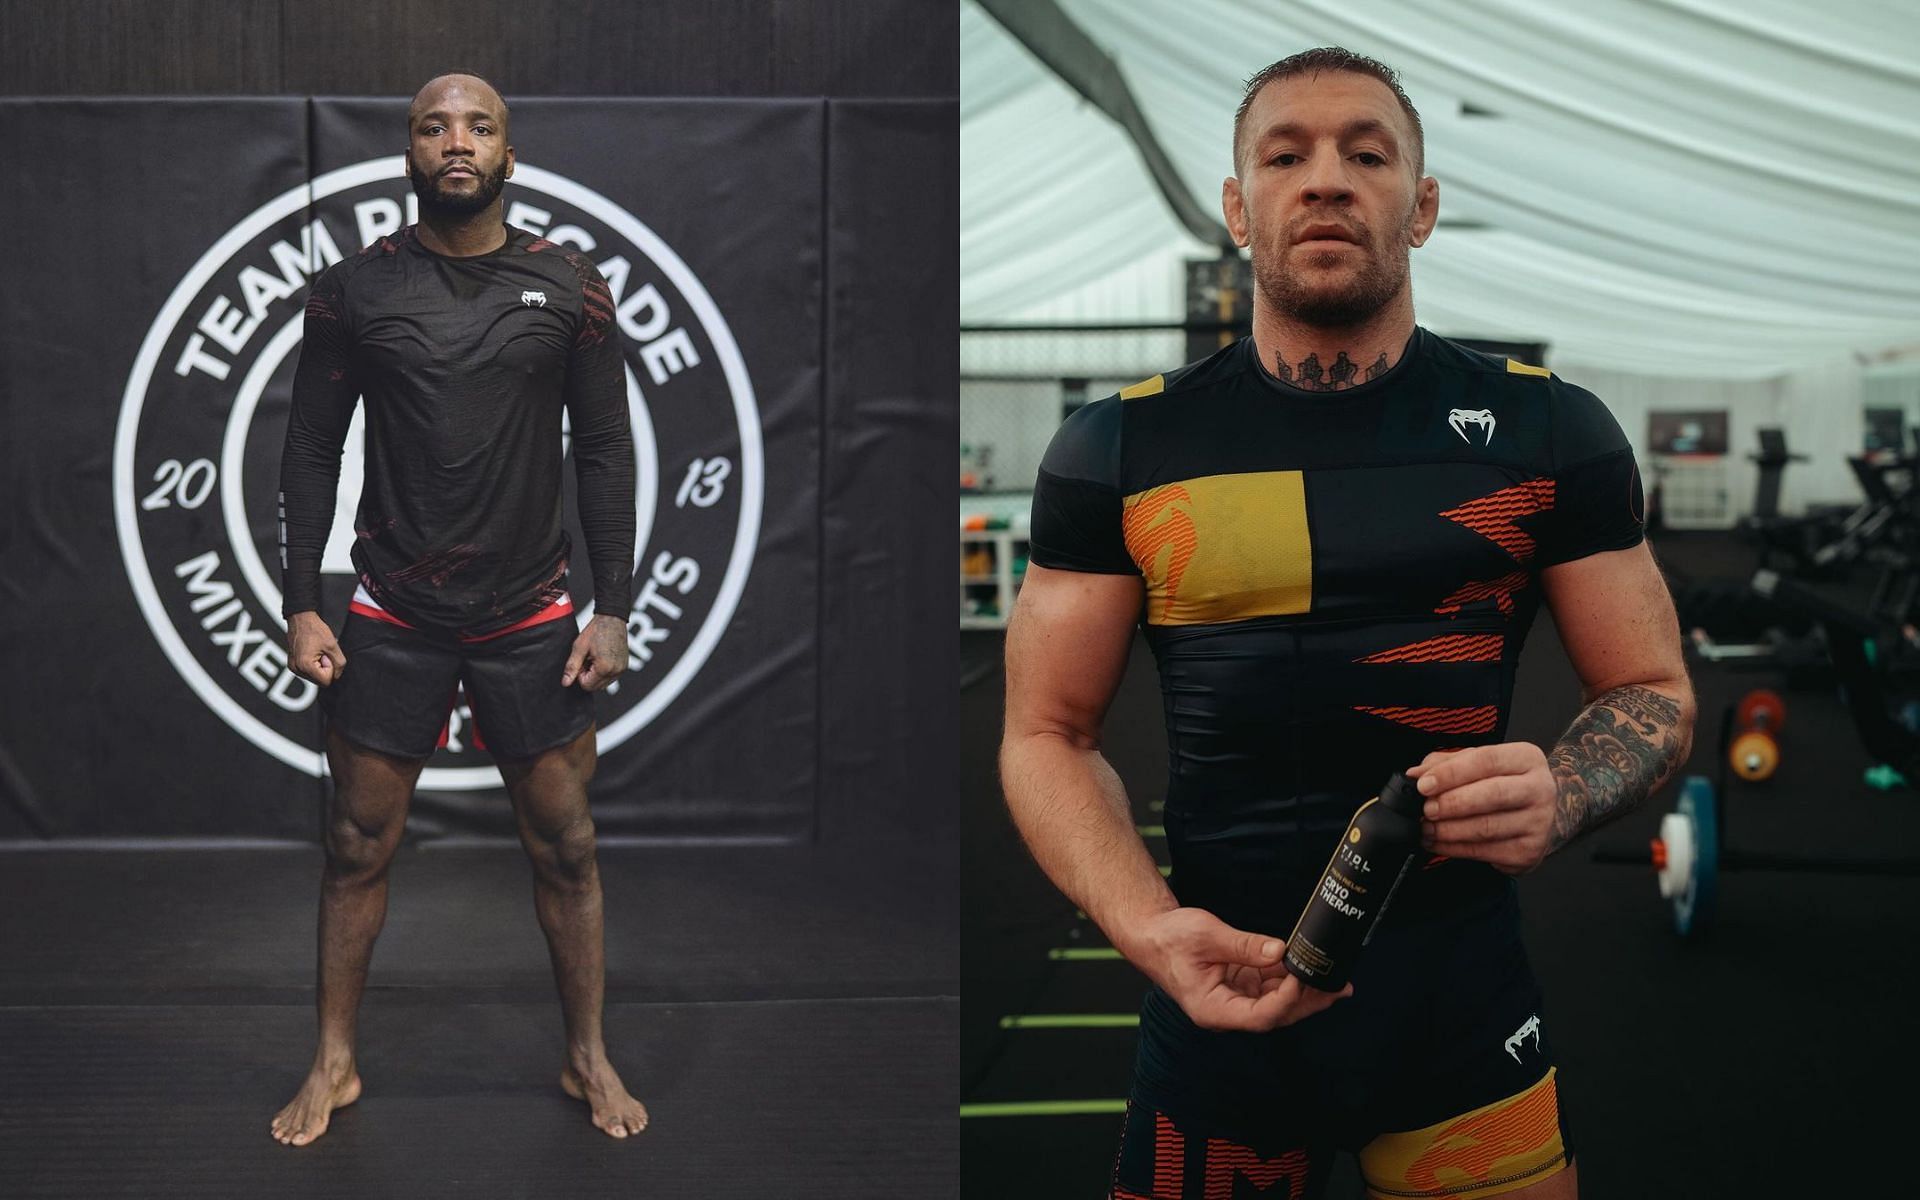 Leon Edwards (left) wants to fight Conor McGregor (right) next [Images courtesy: @leonedwardsmma and @thenotoriousmma on Instagram]